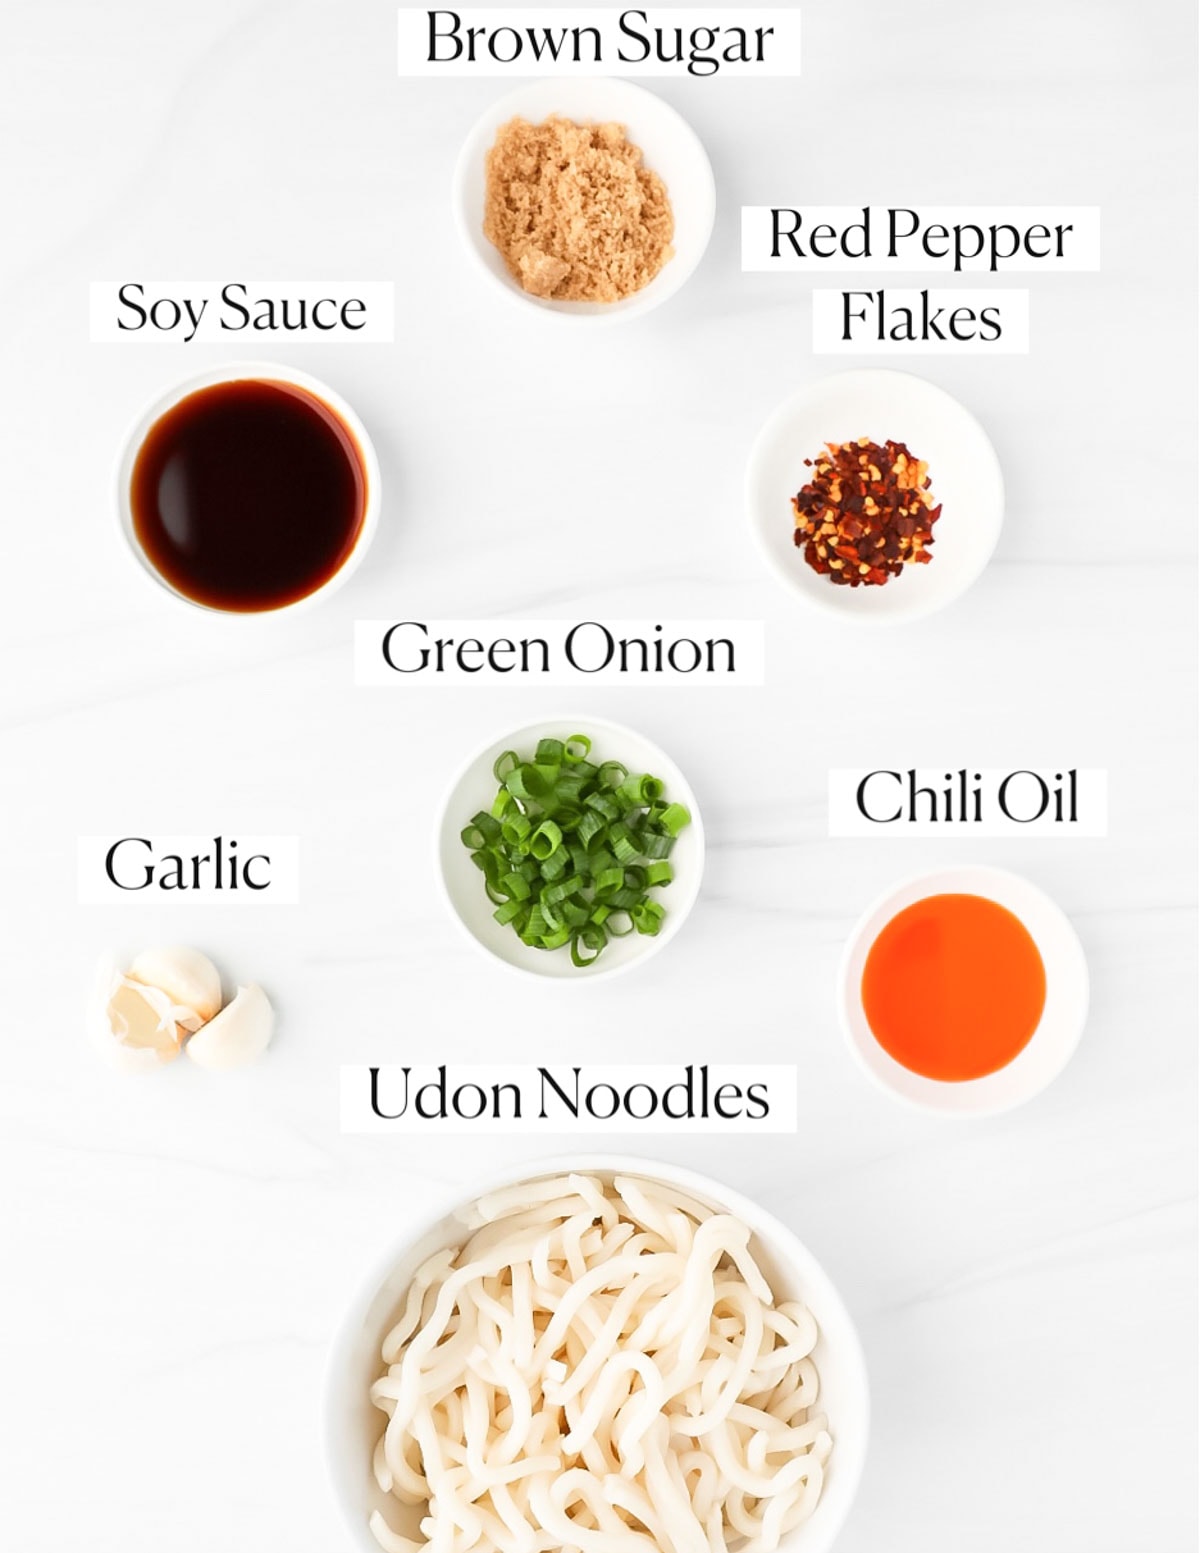 Labeled ingredients in small white bowls including: brown sugar, red pepper flakes, soy sauce, green onion, chili oil, garlic, and udon noodles,